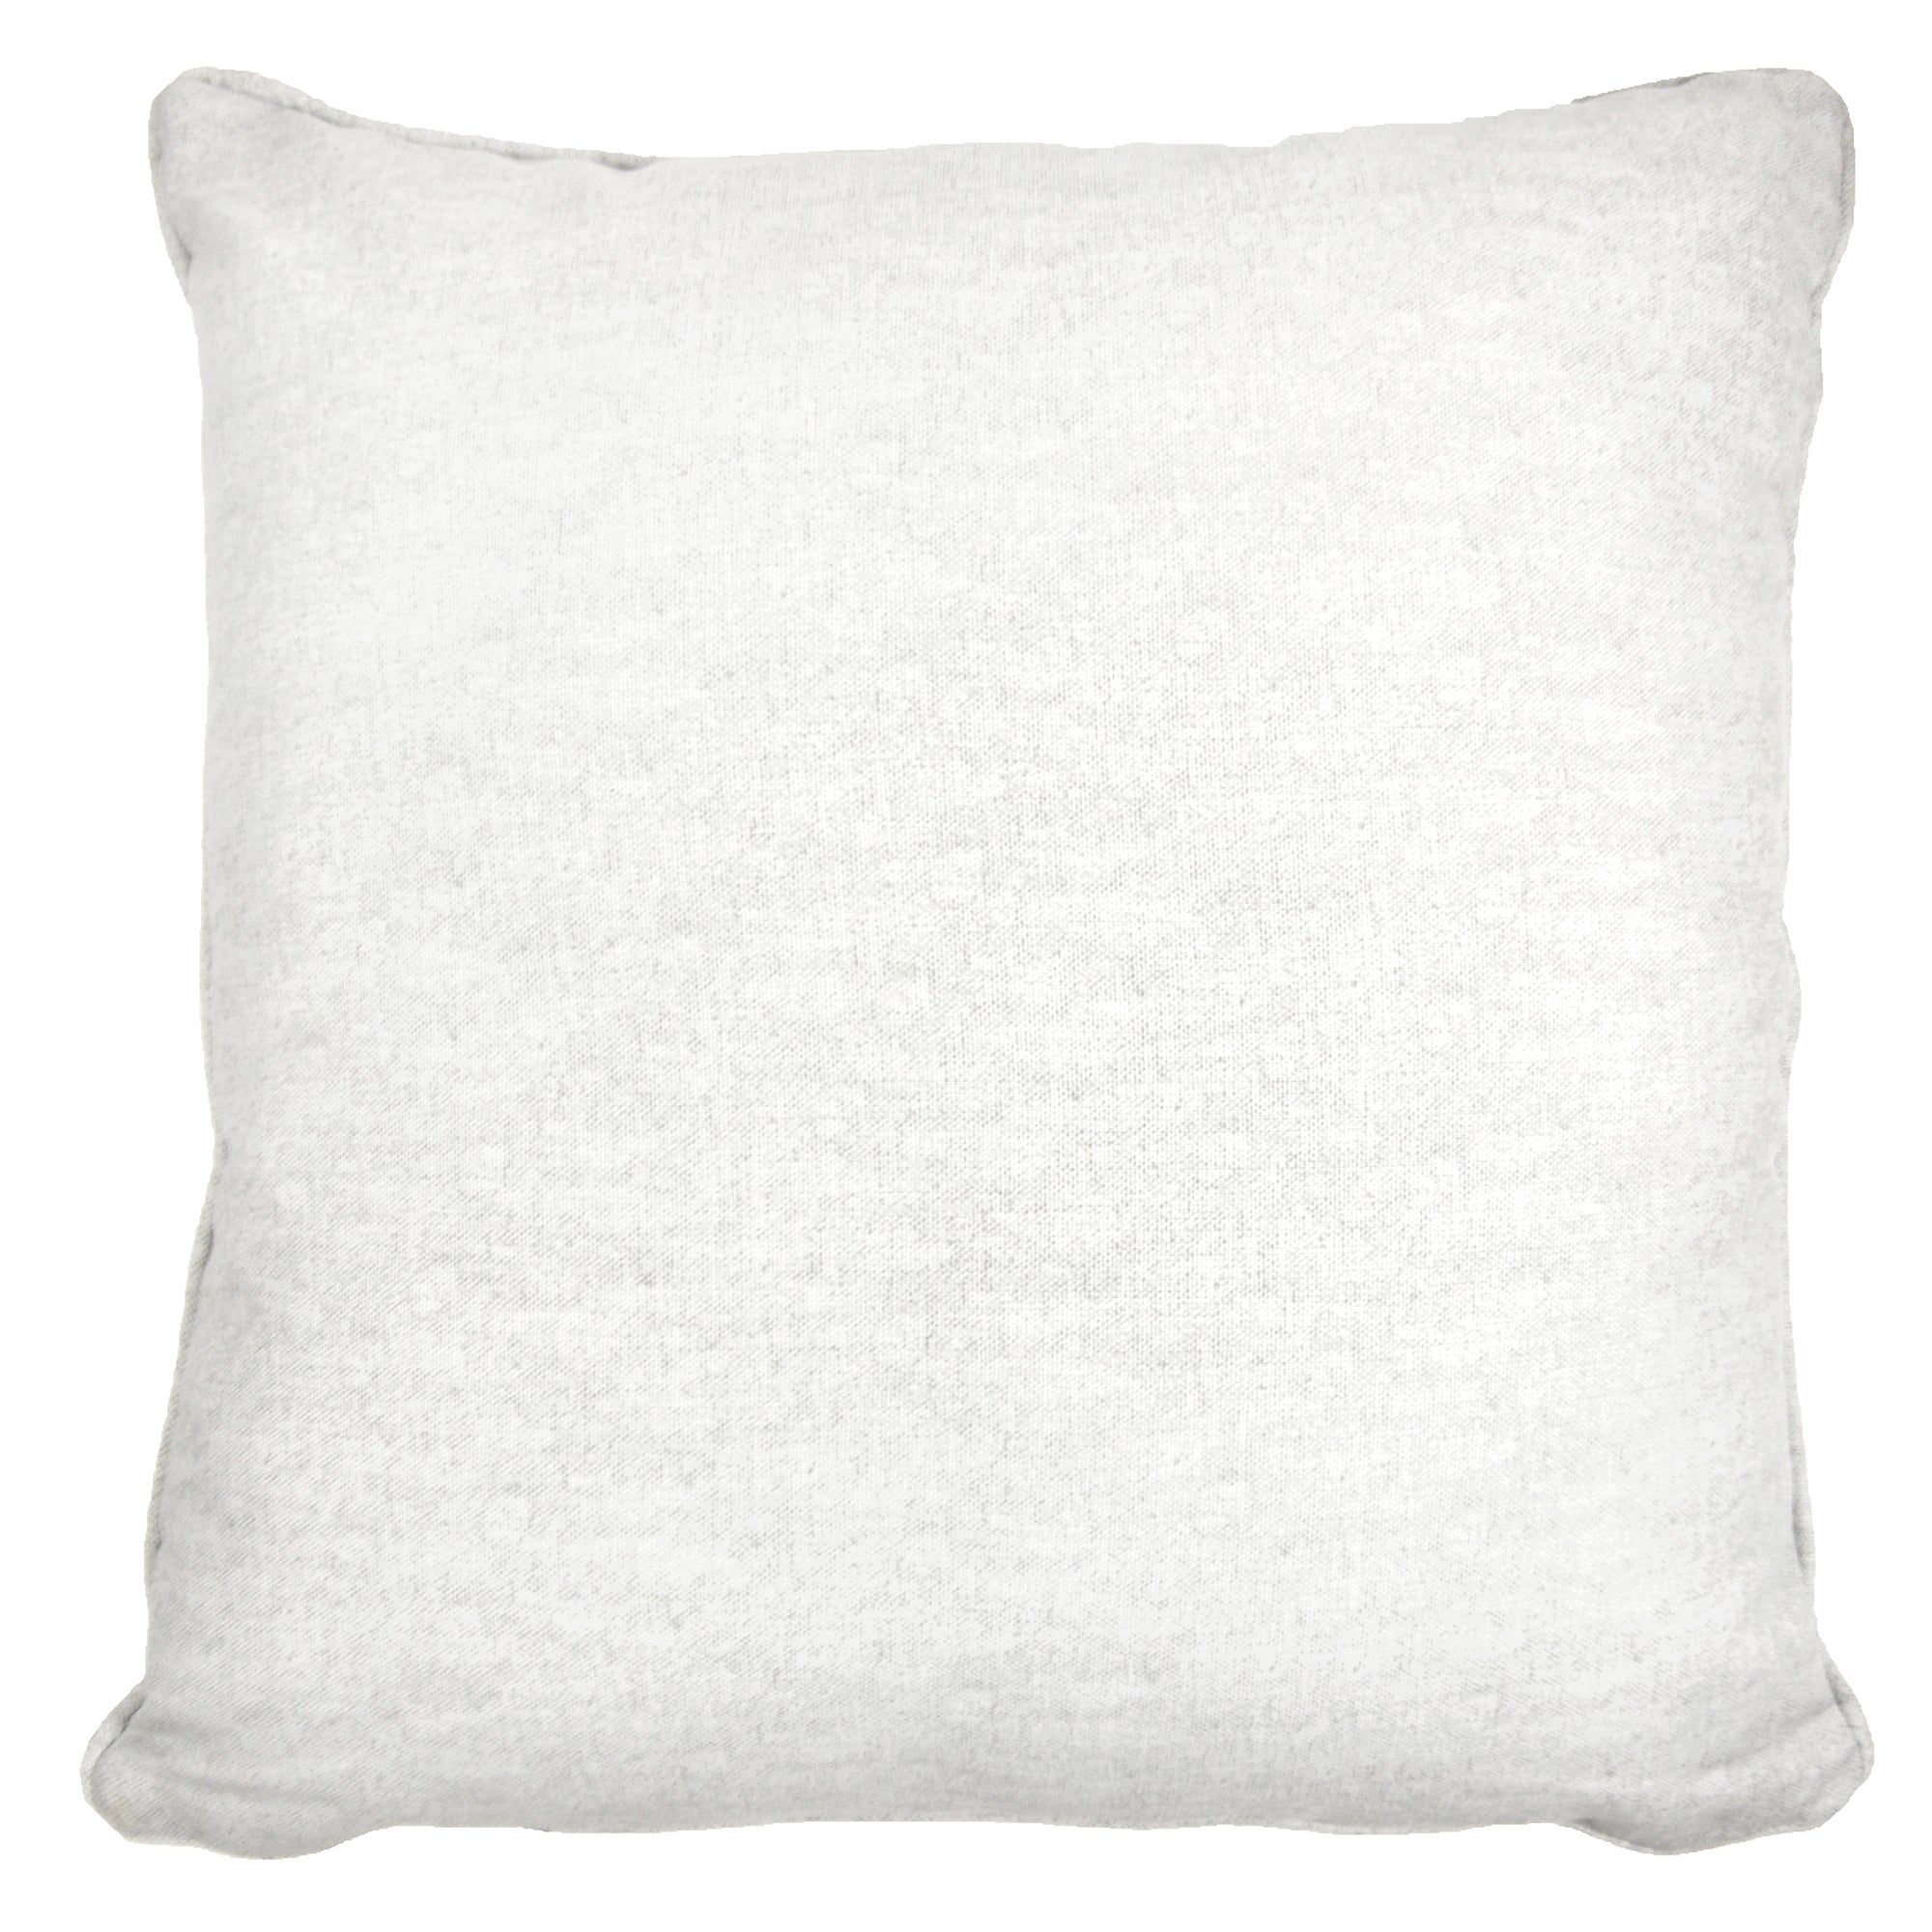 Sorbonne - 100% Cotton Filled Cushion in White - by Fusion